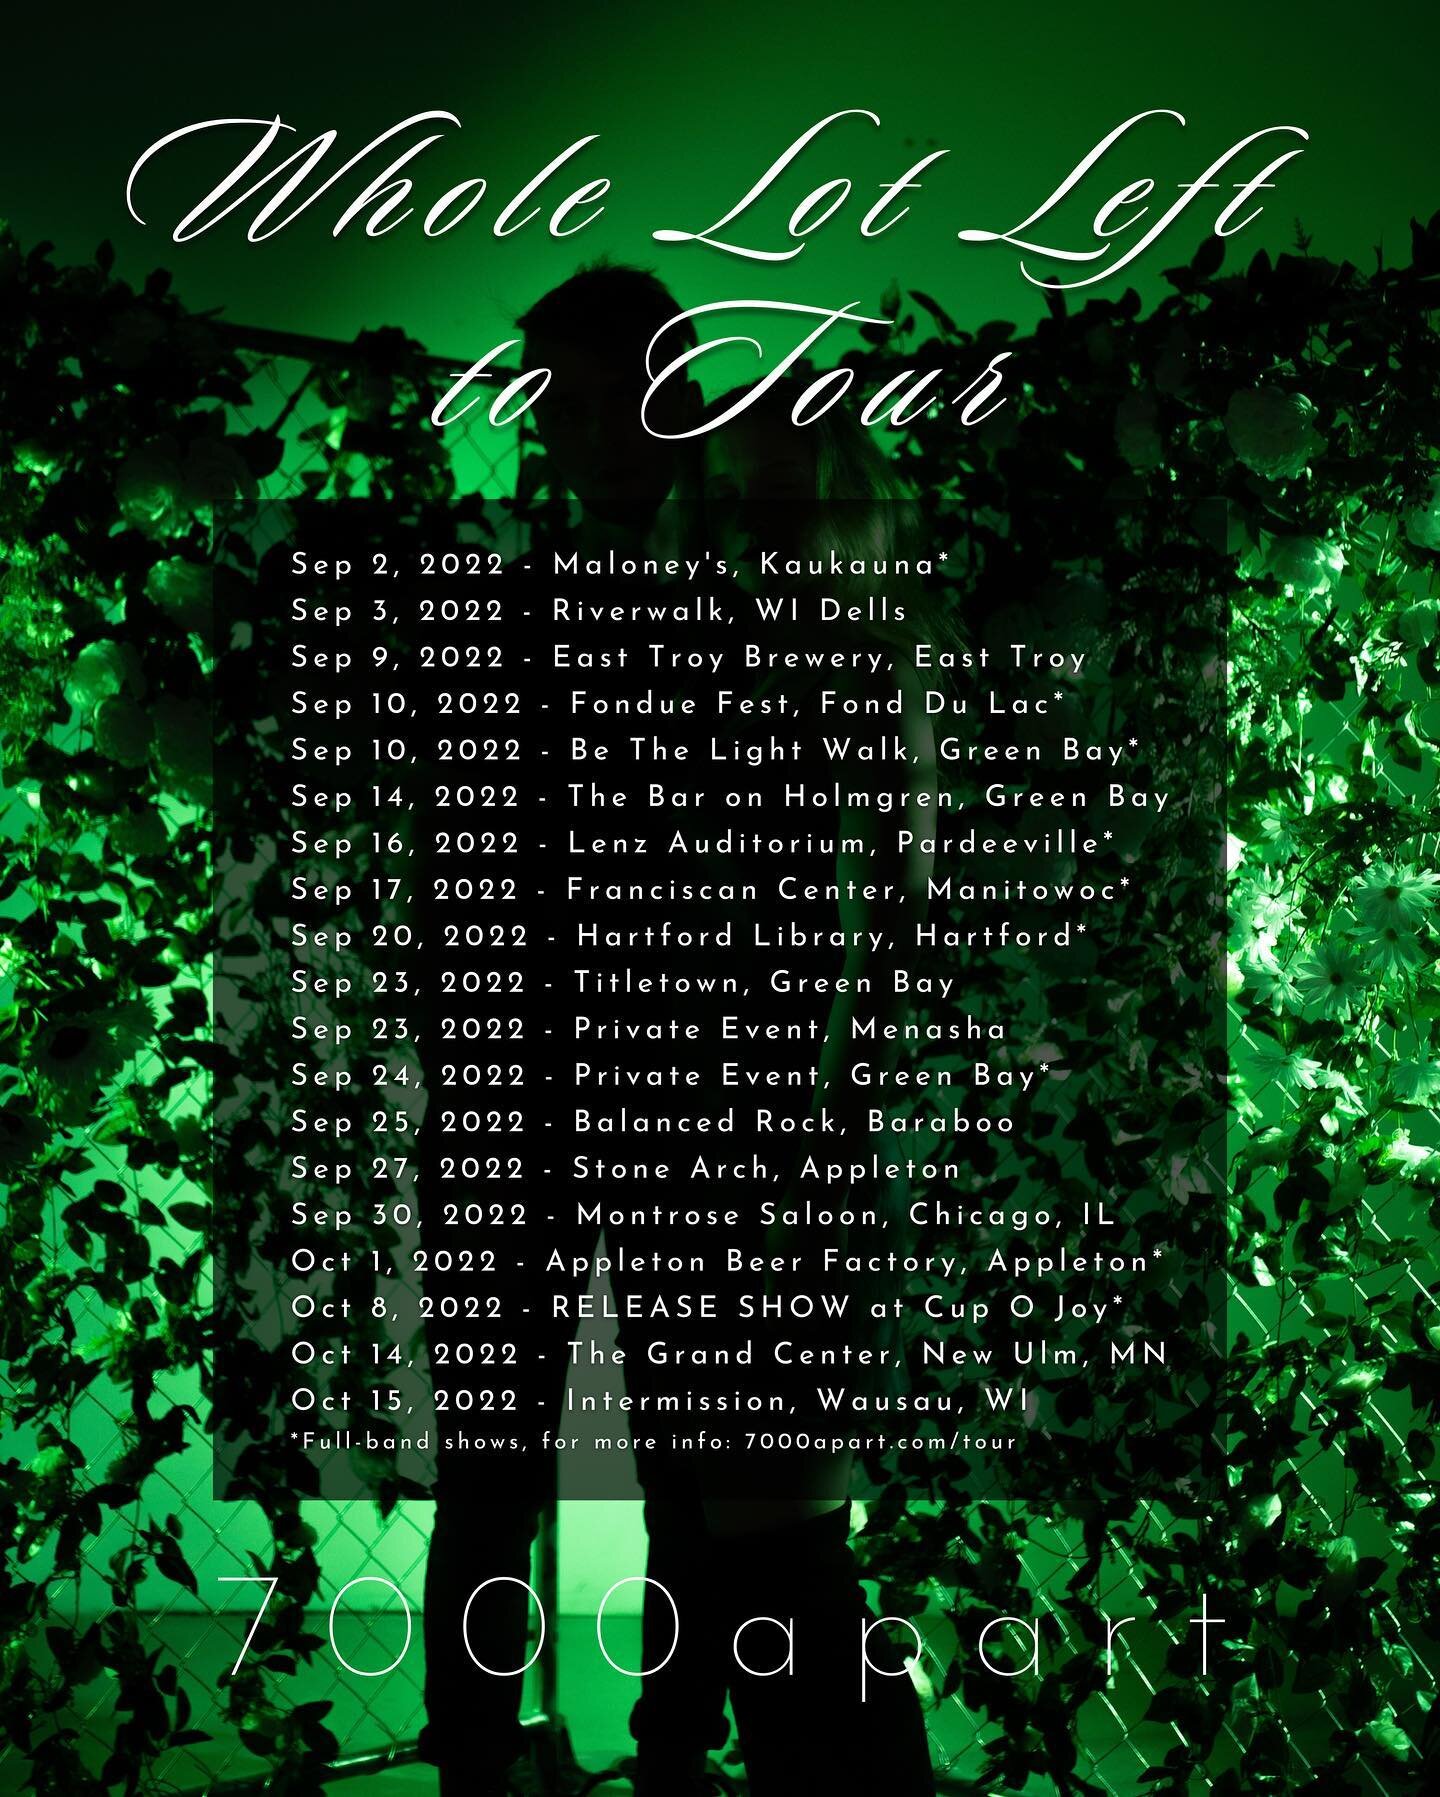 Before we head to Sweden, we still got a whole lot left to tour! (Get it?) And we really hope to see all you Wisconsin, Minnesota &amp; Illinois friends before we leave! 💚 

Oh, also, look closely at October 8th, we&rsquo;re having our release show 